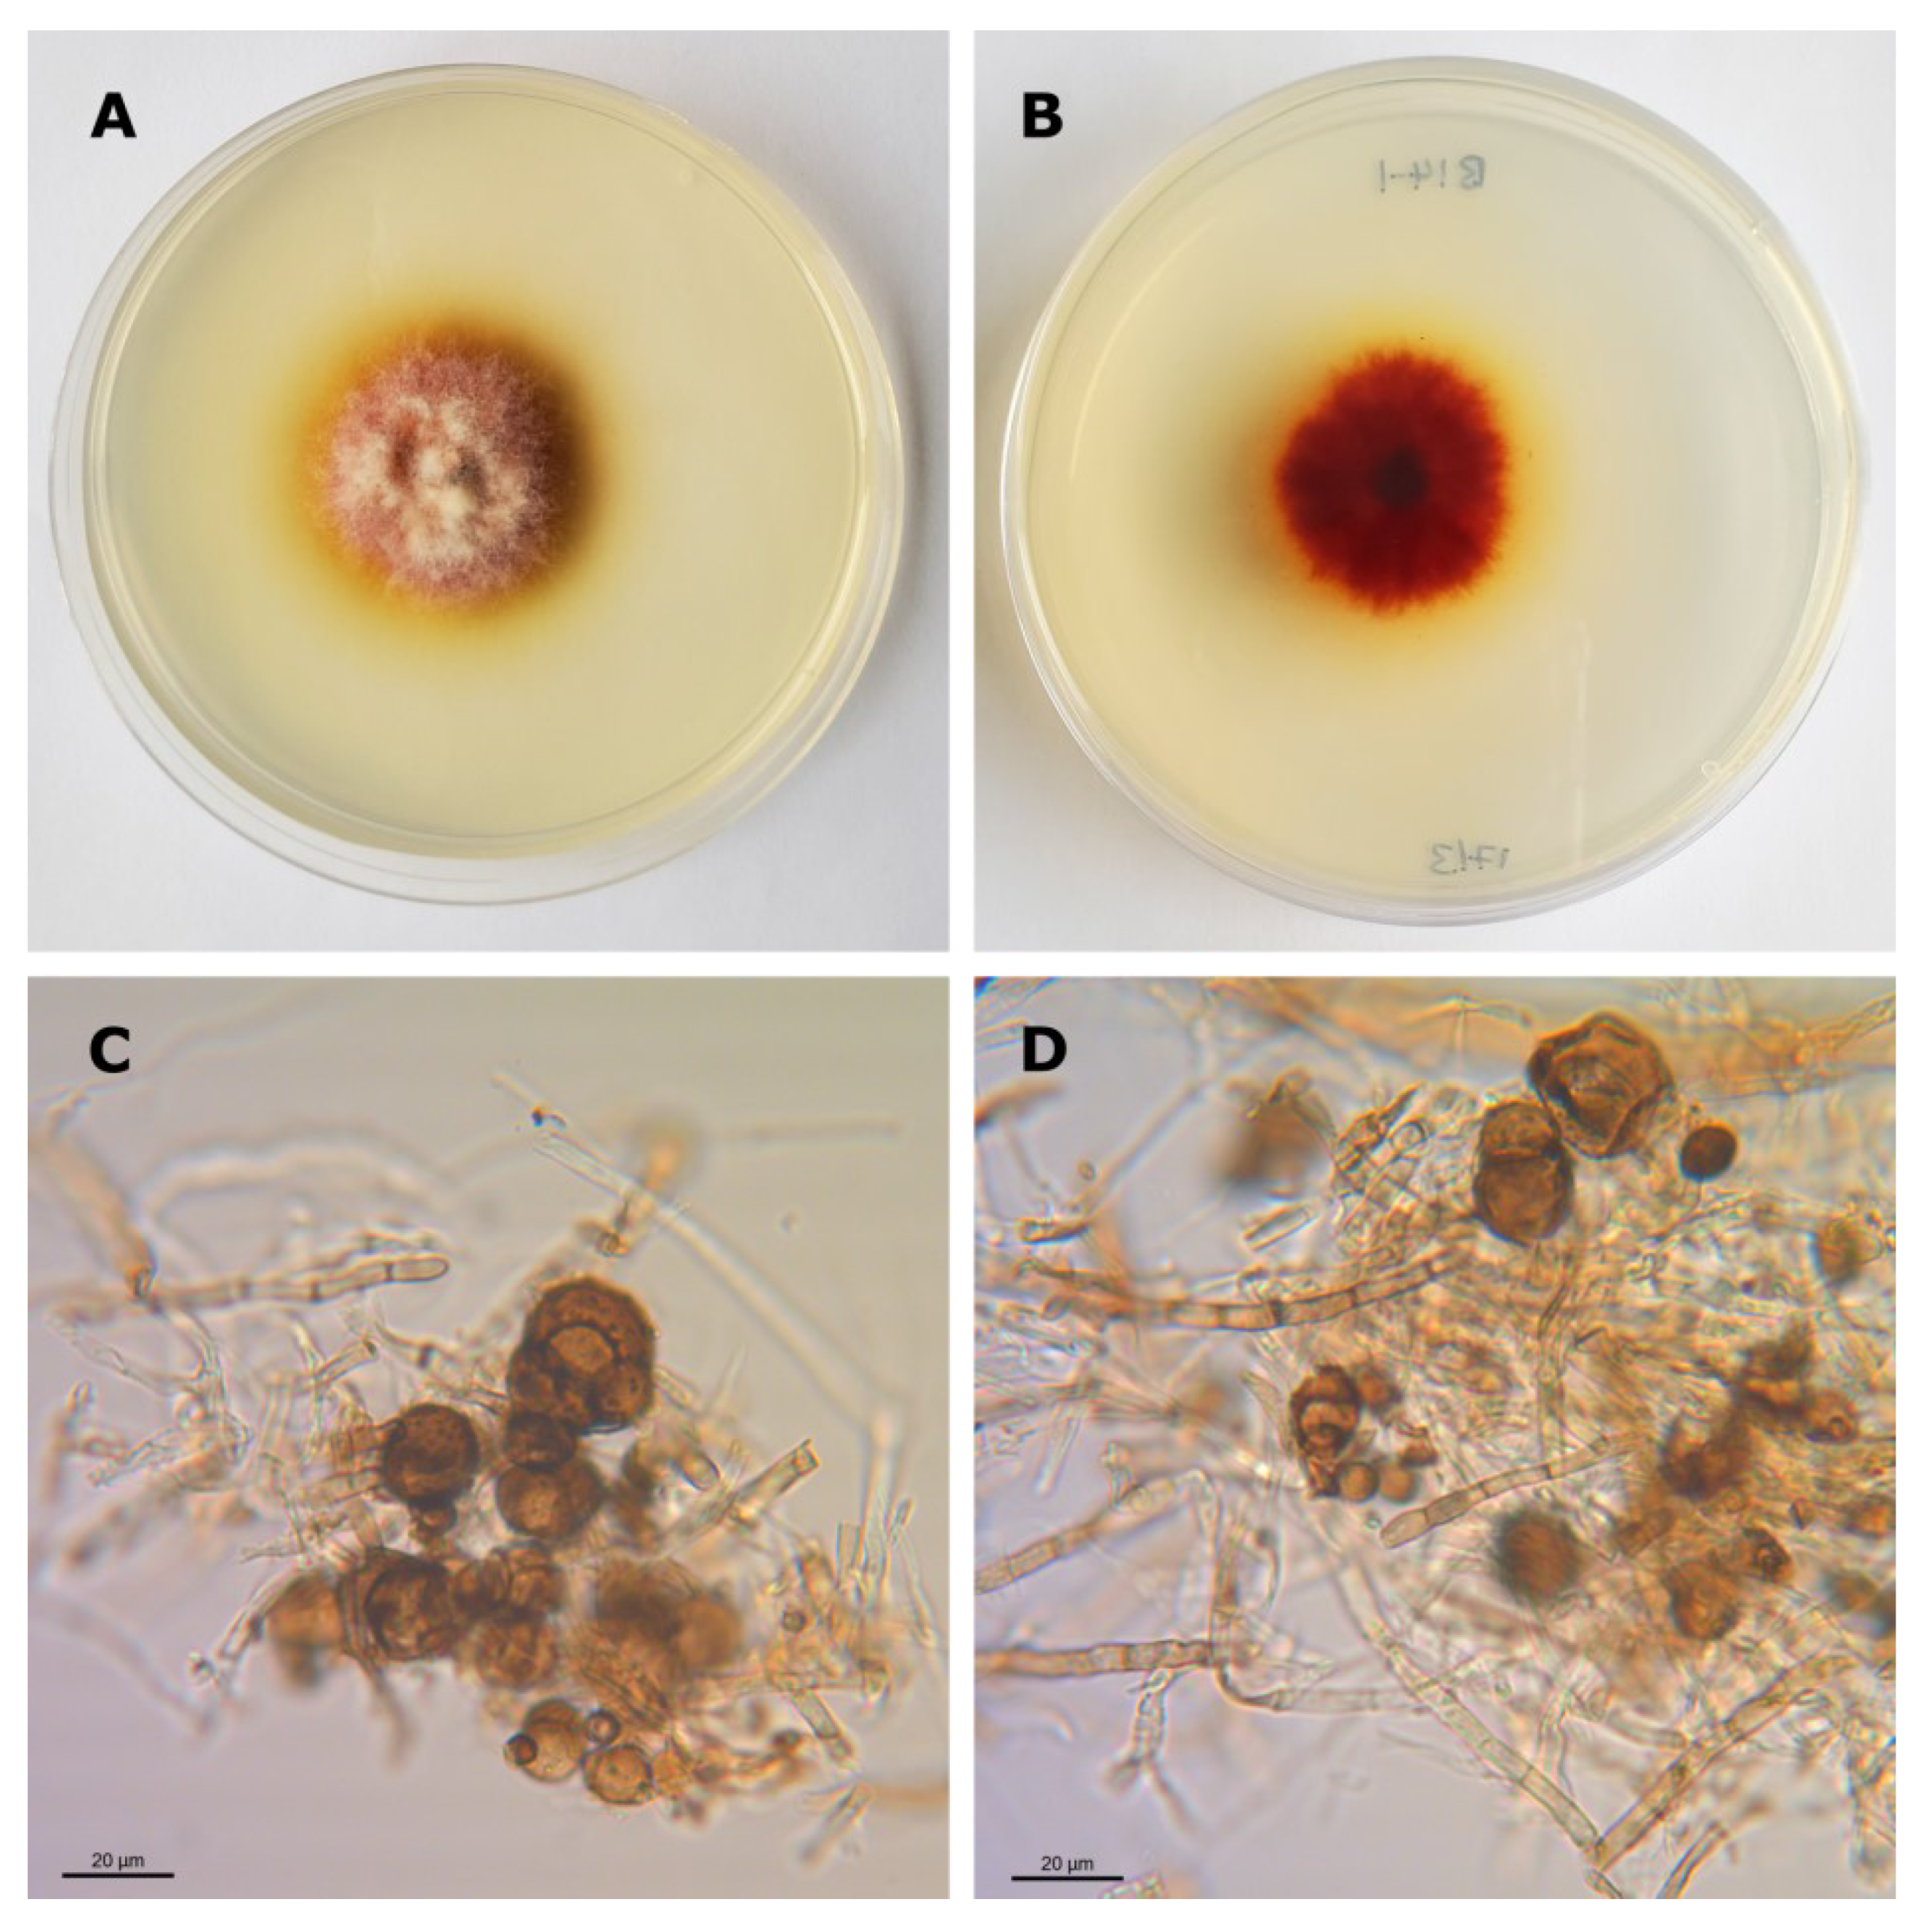 Agriculture | Free Full-Text | From Endophyte Community Analysis